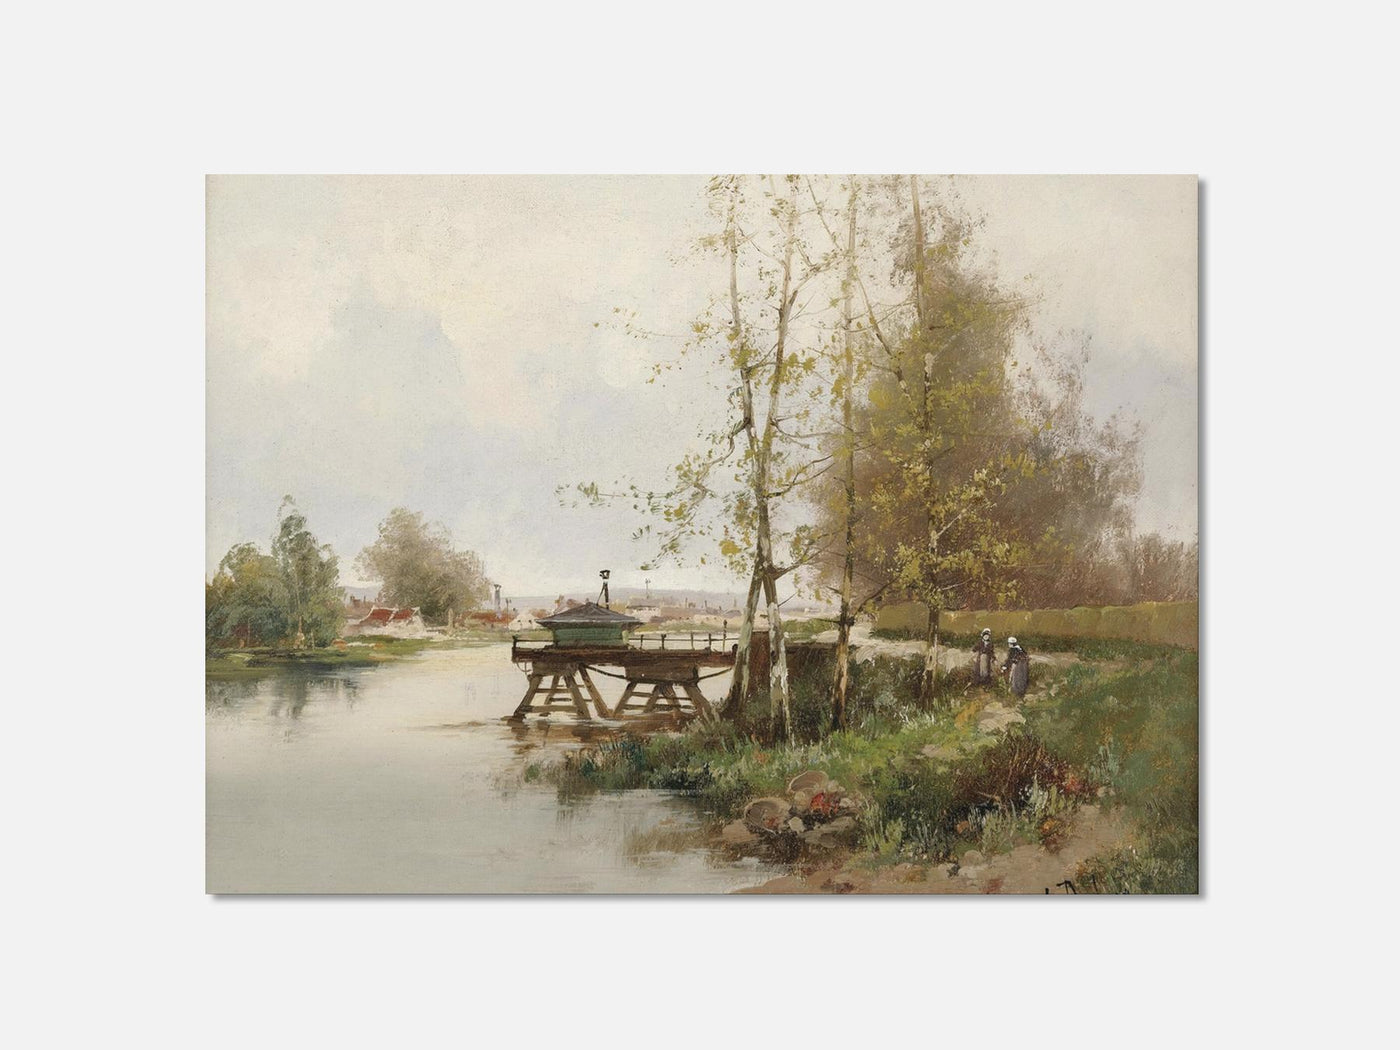 The Pond at the edge of the village Art Print mockup - A_p15-V1-PC_AP-SS_1-PS_5x7-C_def variant